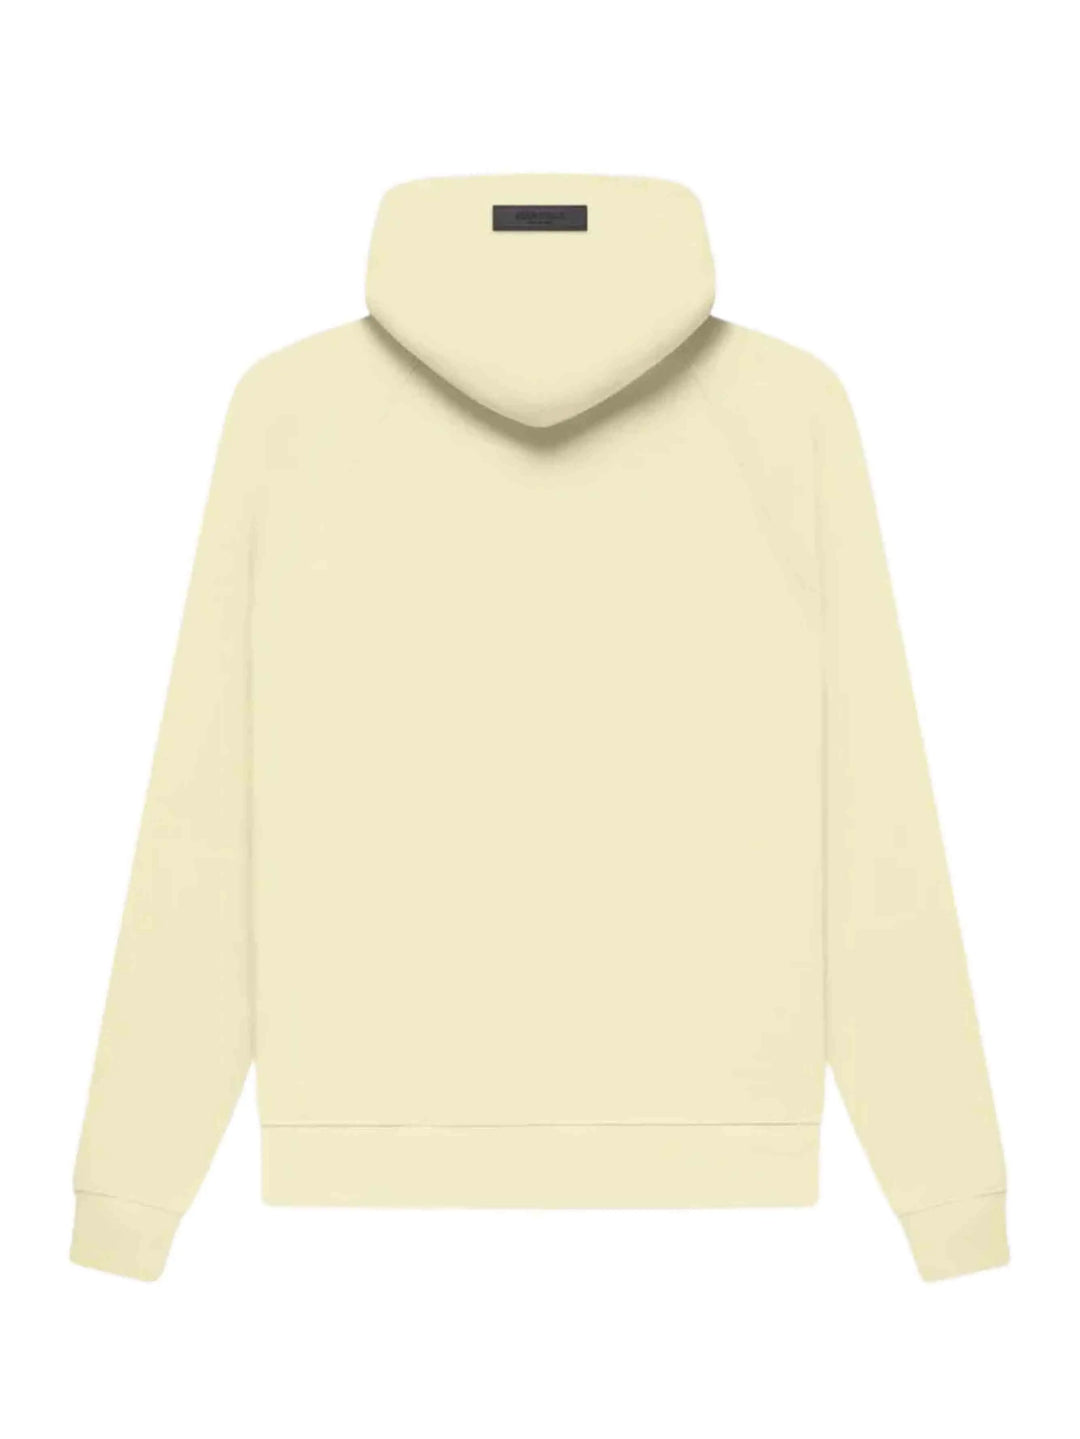 Fear of God Essentials Hoodie Canary Prior